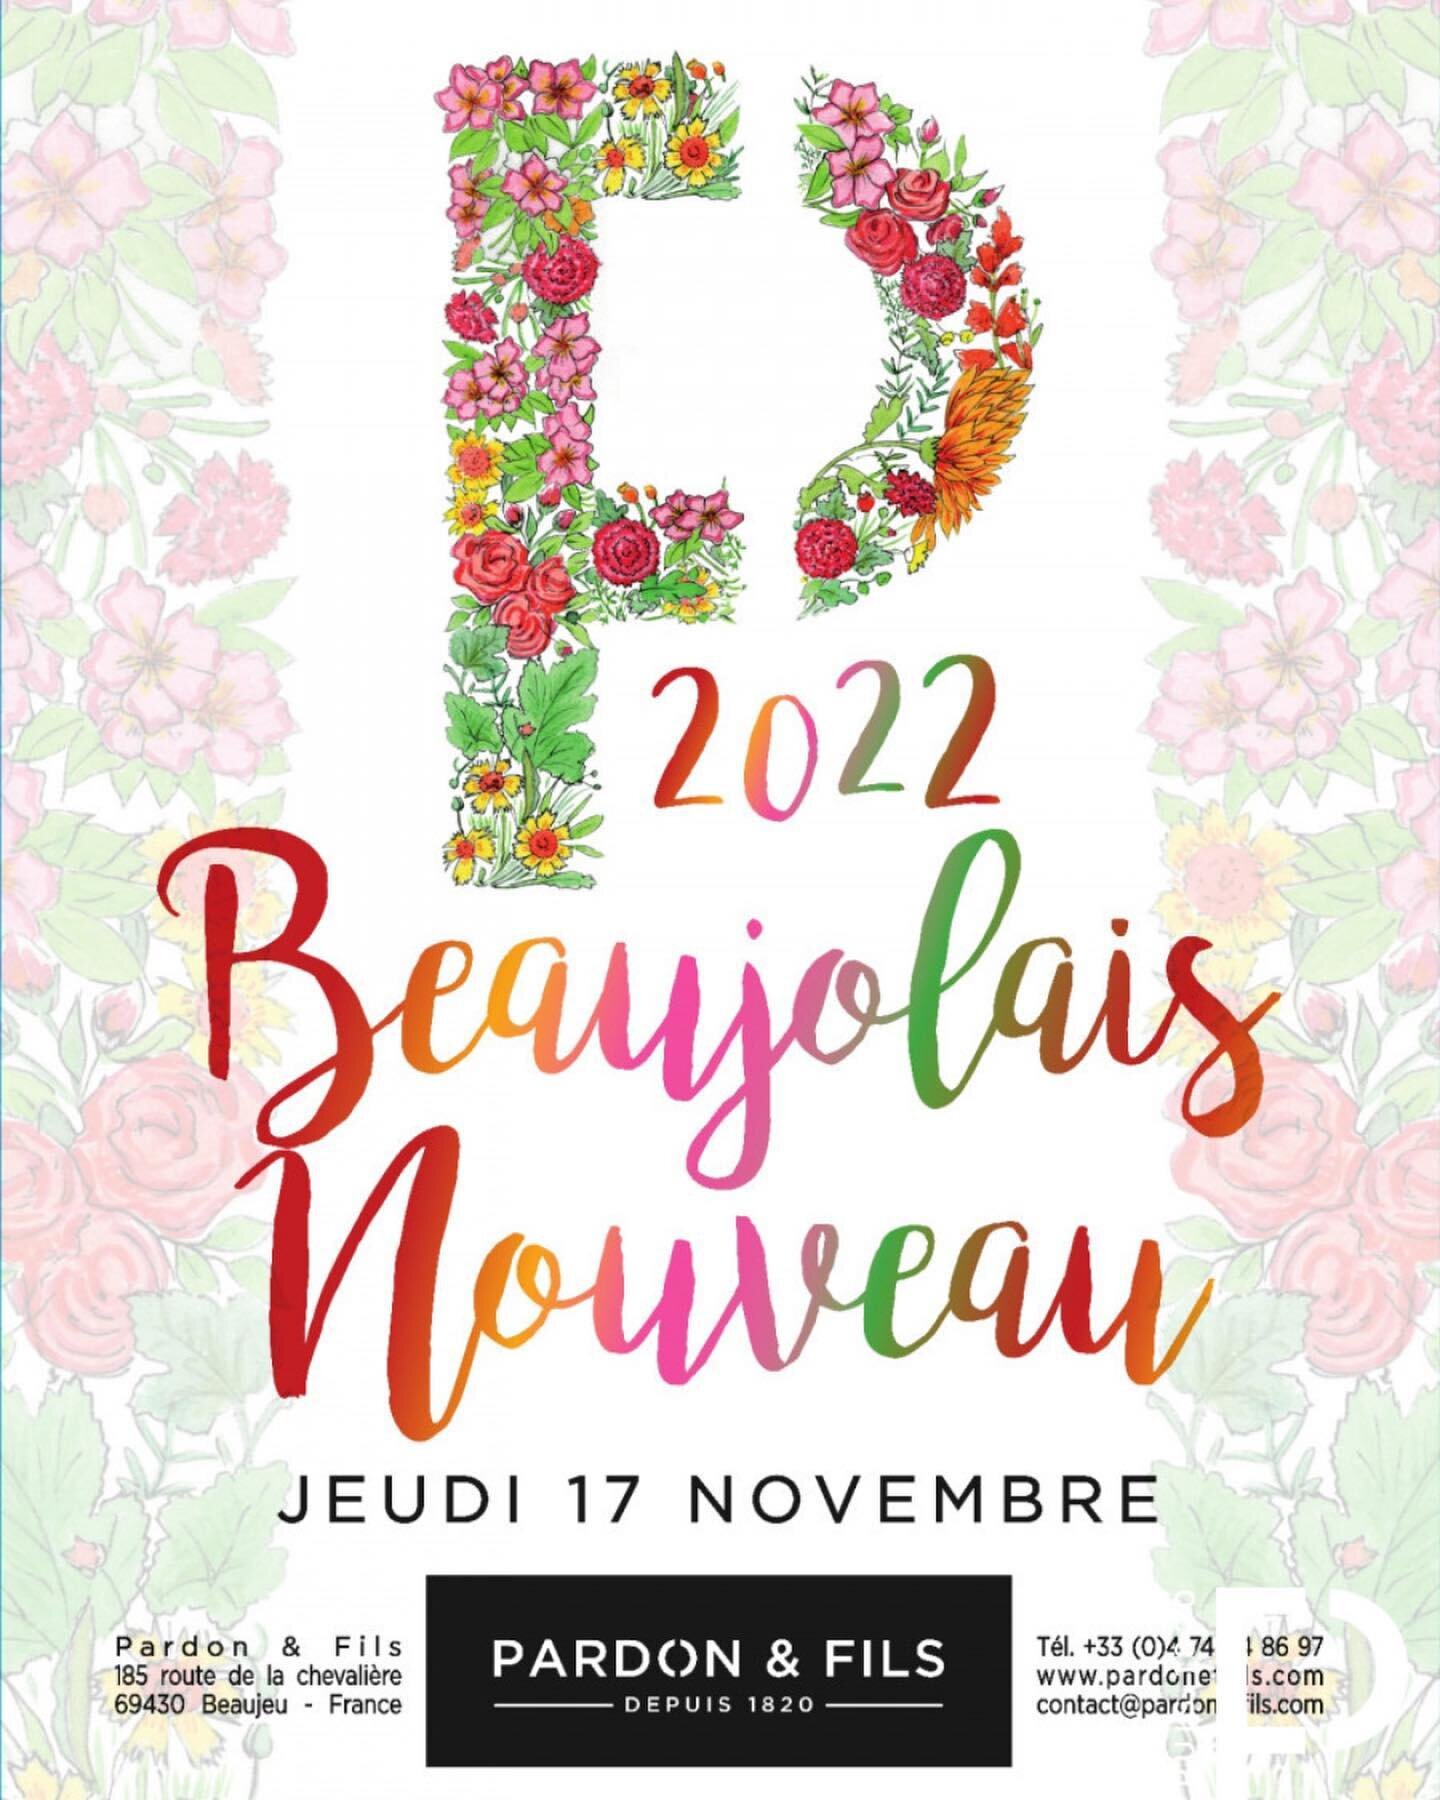 This week sees the arrival of Beaujolais Nouveau 2022. We will have our award winning Nouveau from @pardonetfils as always including one without sulphites and their white Macon Blanc Villages Nouveau.

The wines will be available to taste between 14: